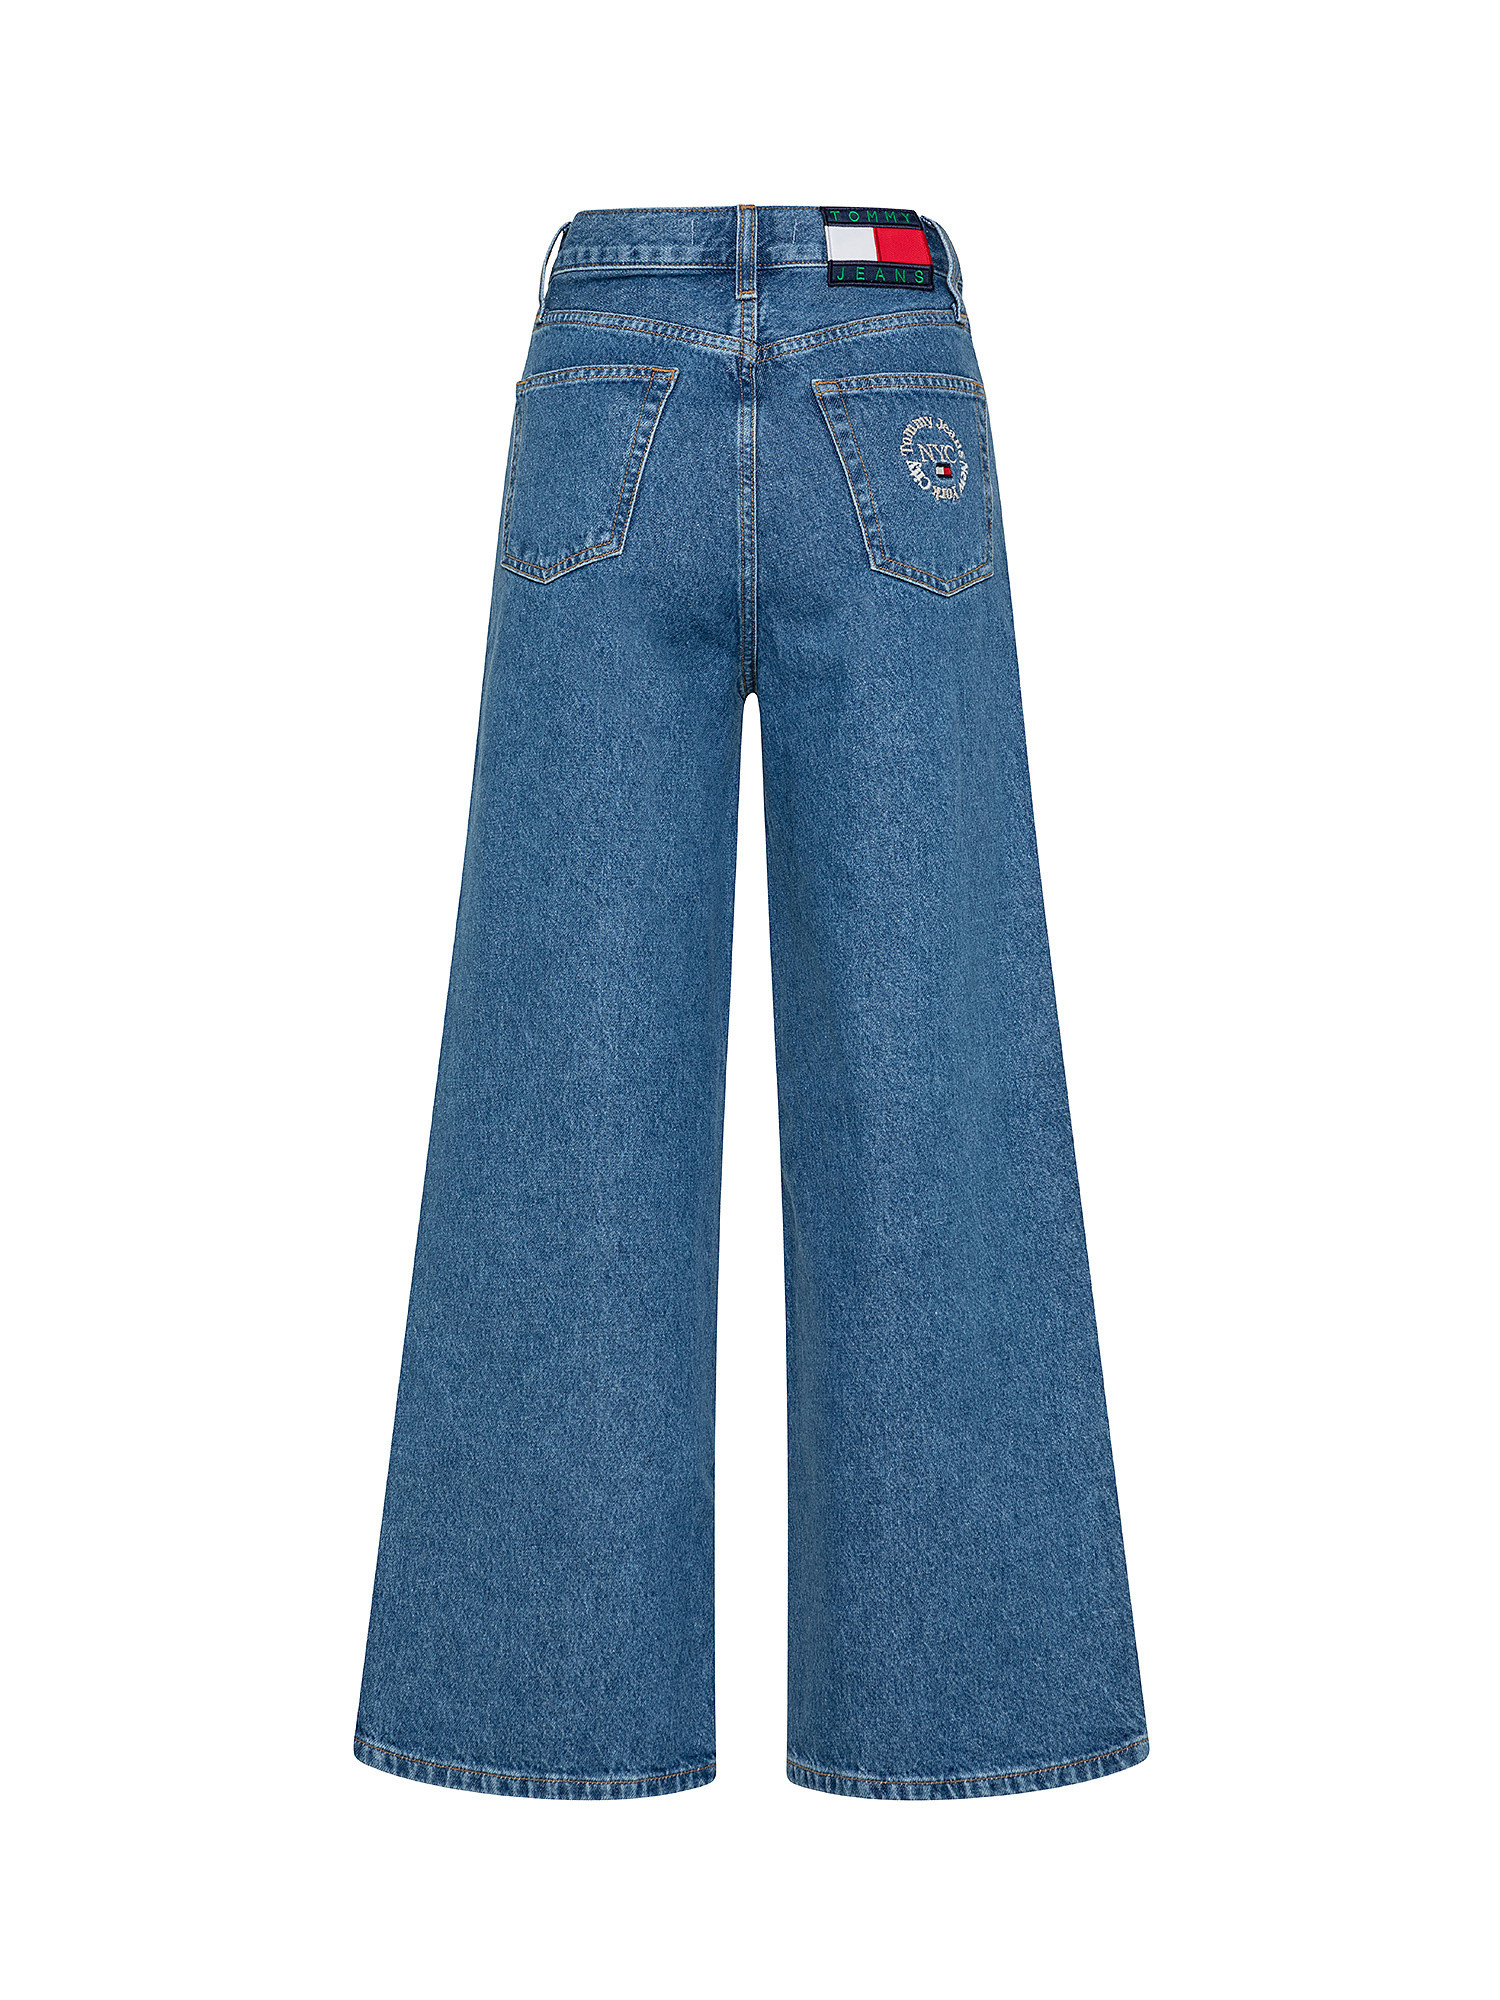 Claire high-waisted jeans, Denim, large image number 1